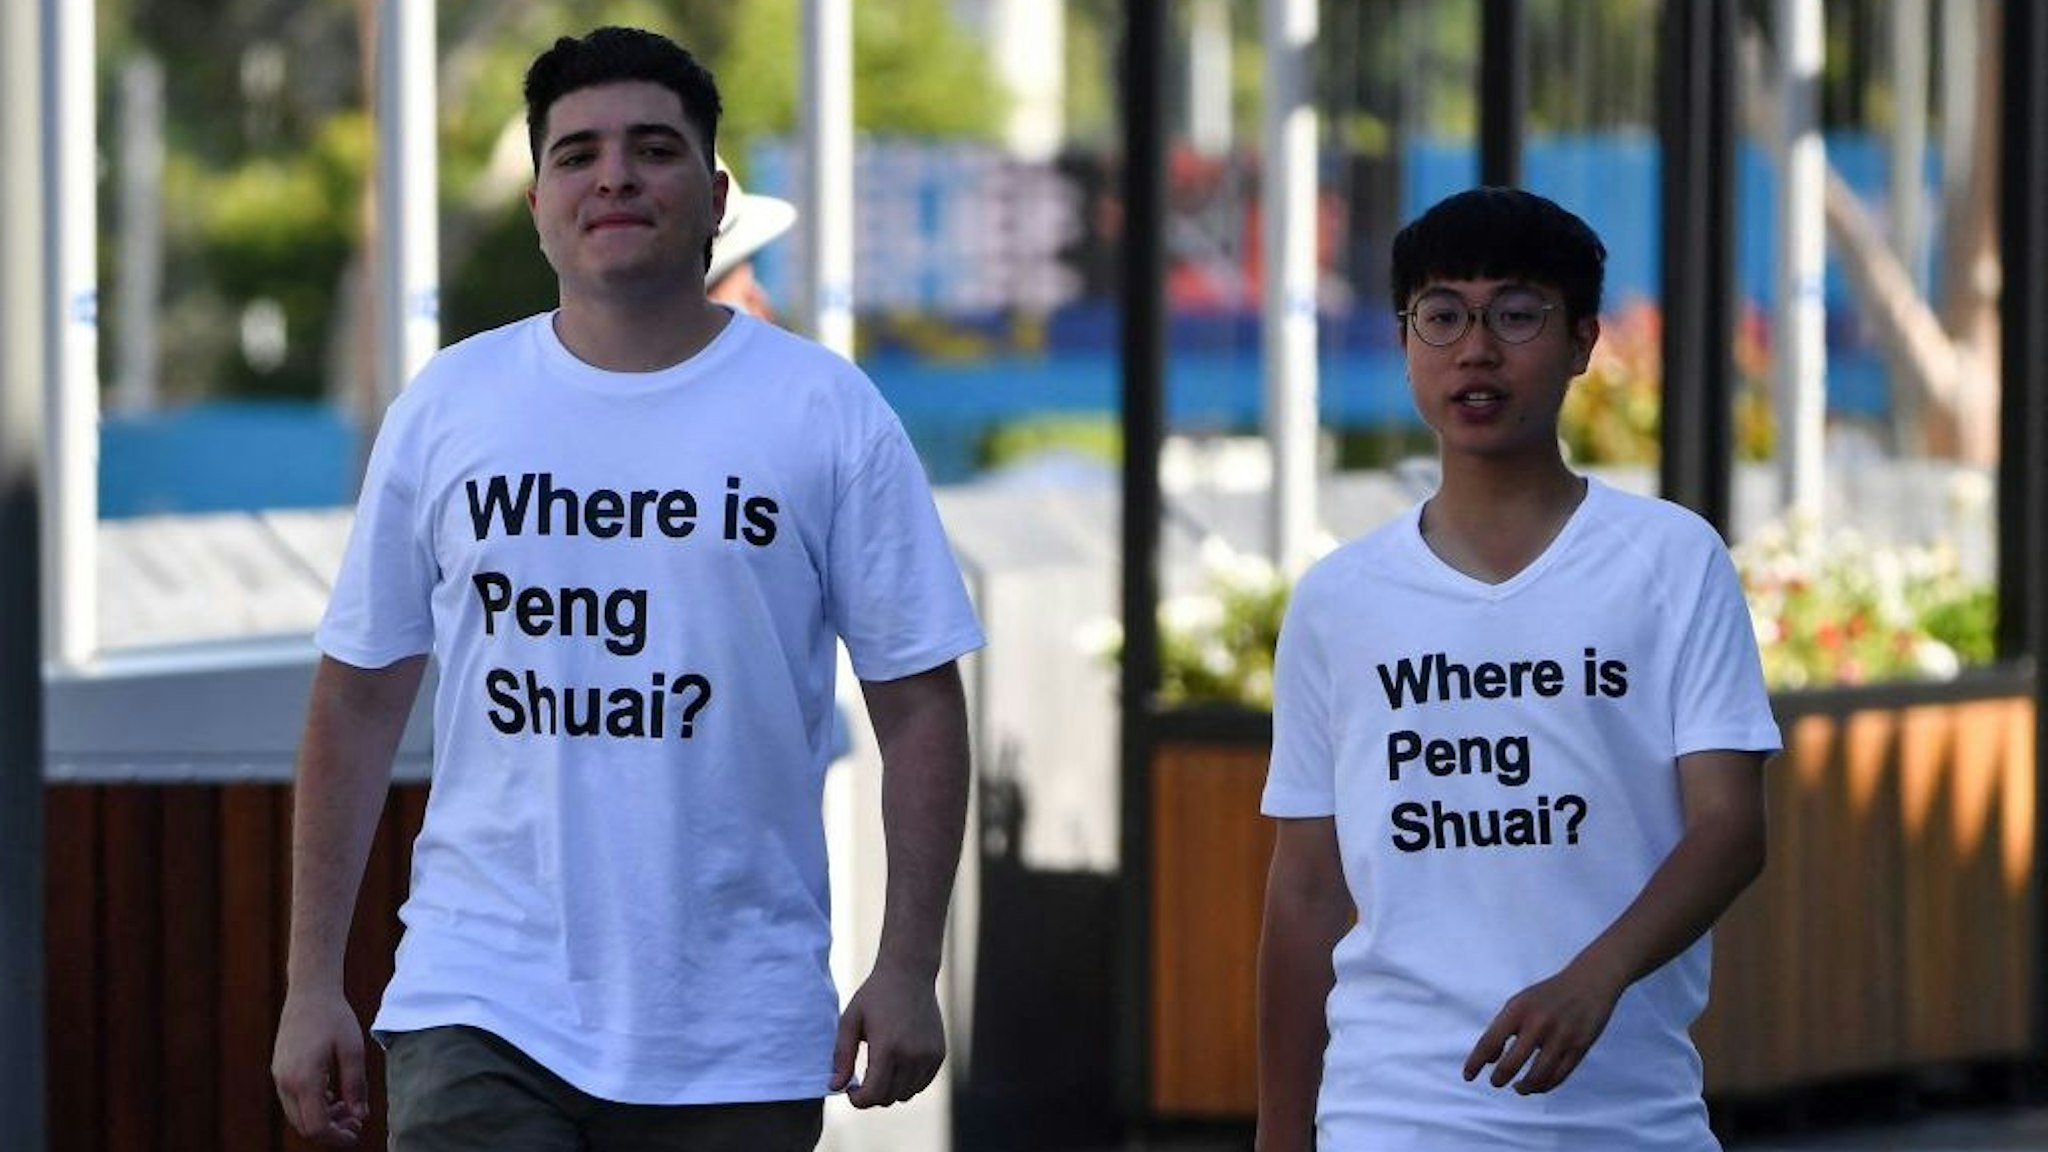 Australian human rights campaigner Drew Pavlou (L) is pictured wearing a "Where is Peng Shuai?" T-shirt, referring to the former doubles world number one from China, on the grounds outside one of the venues on day nine of the Australian Open tennis tournament in Melbourne on January 25, 2022. - -- IMAGE RESTRICTED TO EDITORIAL USE - STRICTLY NO COMMERCIAL USE -- (Photo by Paul Crock / AFP) / -- IMAGE RESTRICTED TO EDITORIAL USE - STRICTLY NO COMMERCIAL USE -- (Photo by PAUL CROCK/AFP via Getty Images)